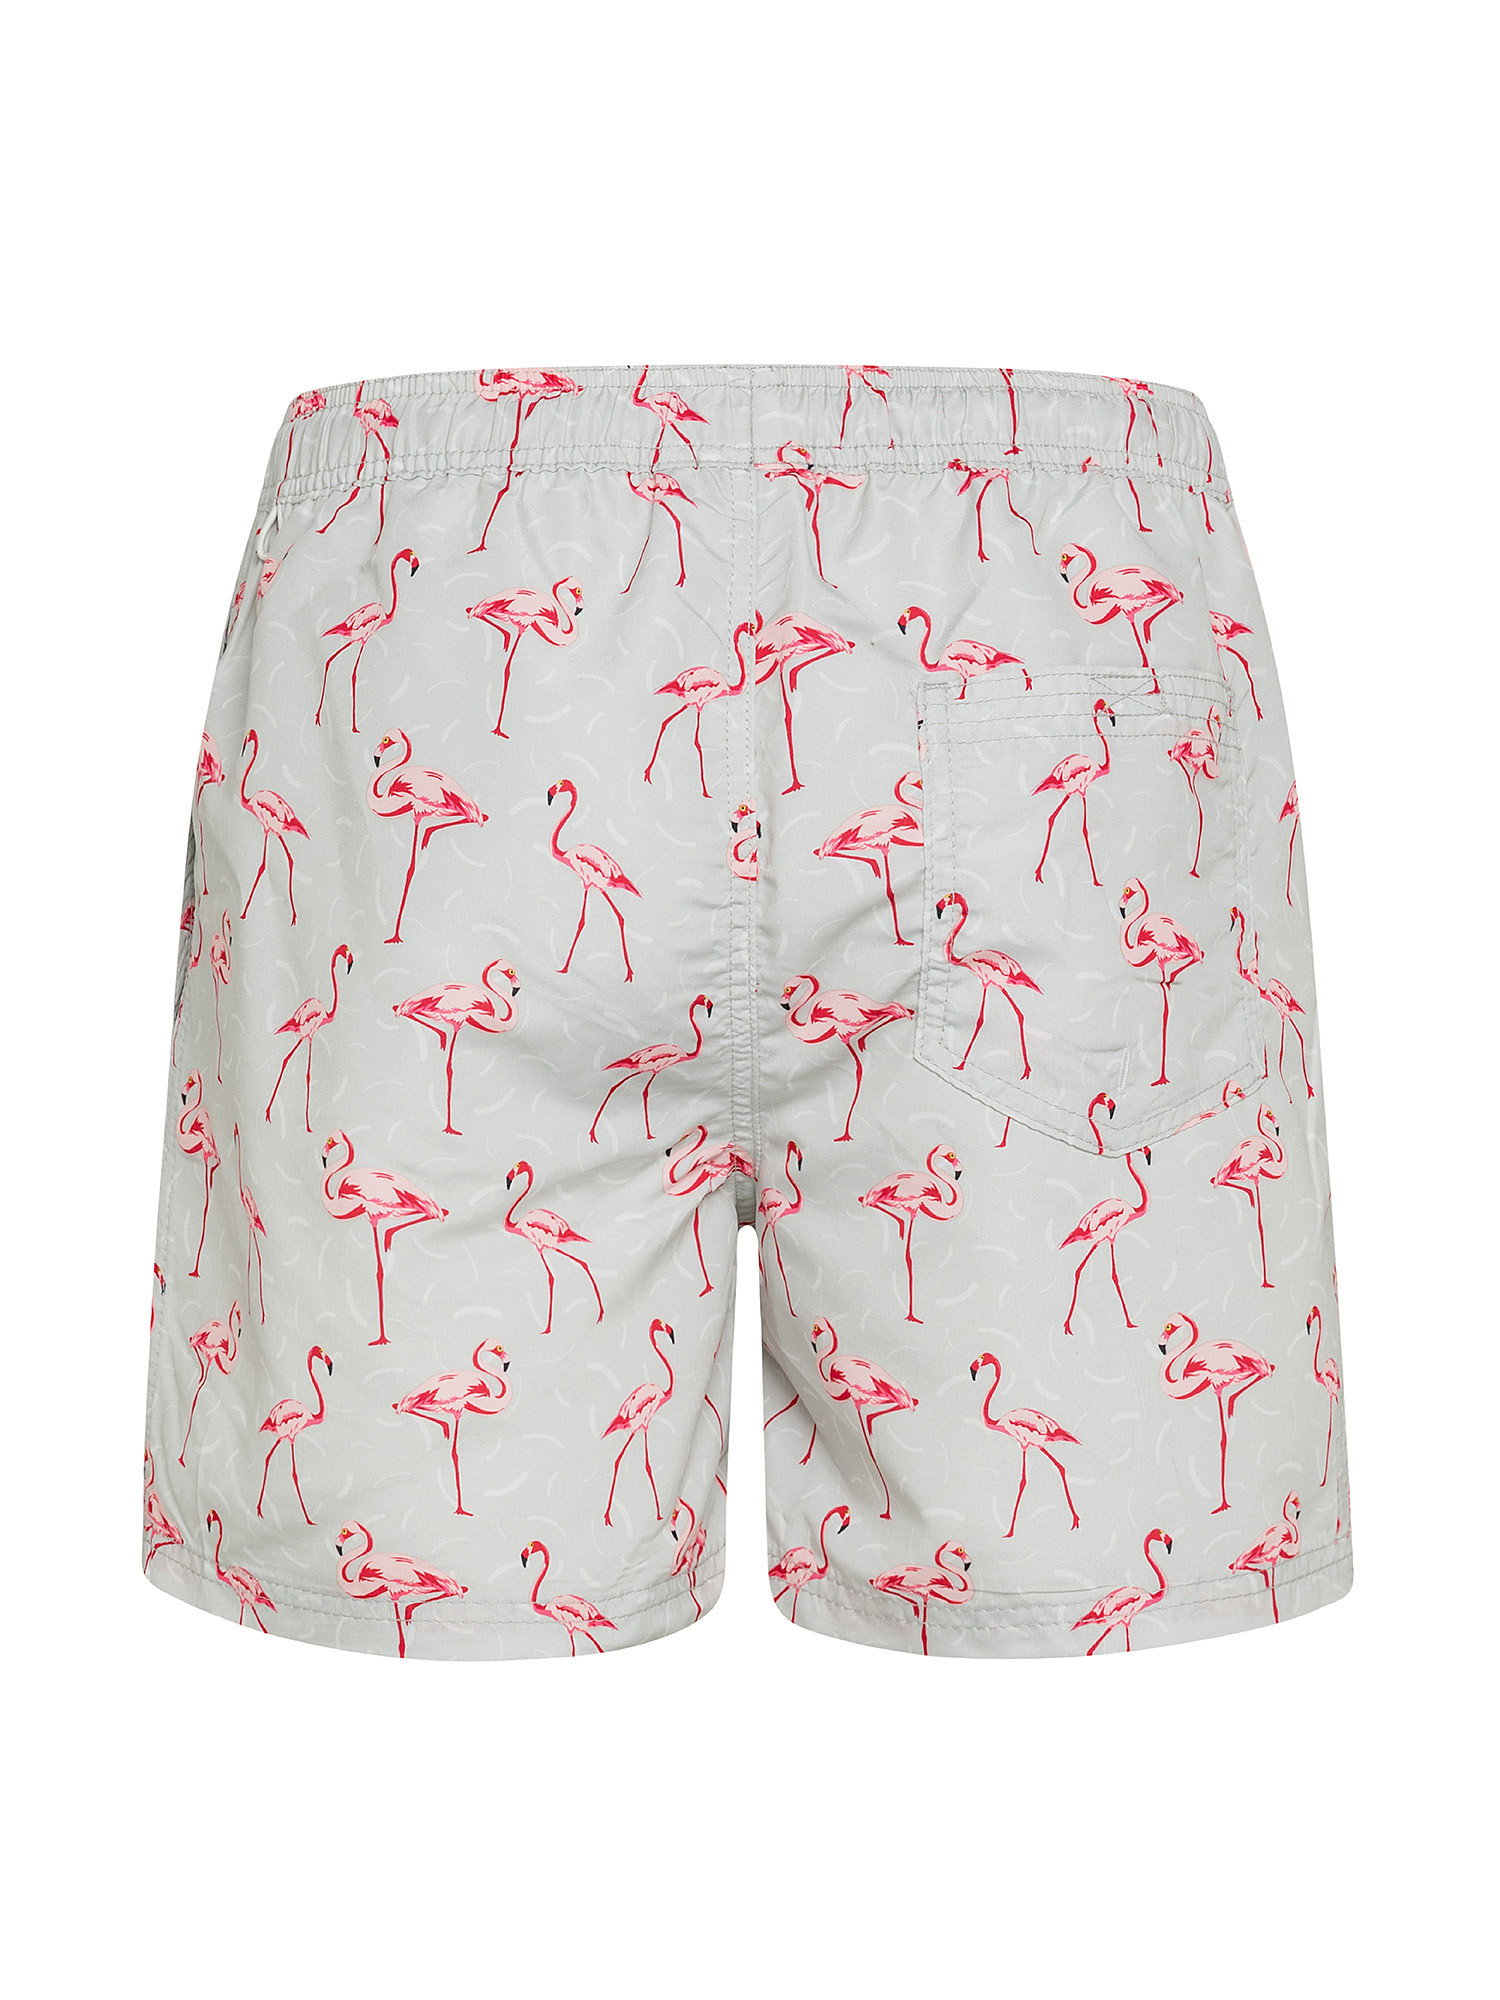 Patterned sea boxer, White, large image number 1